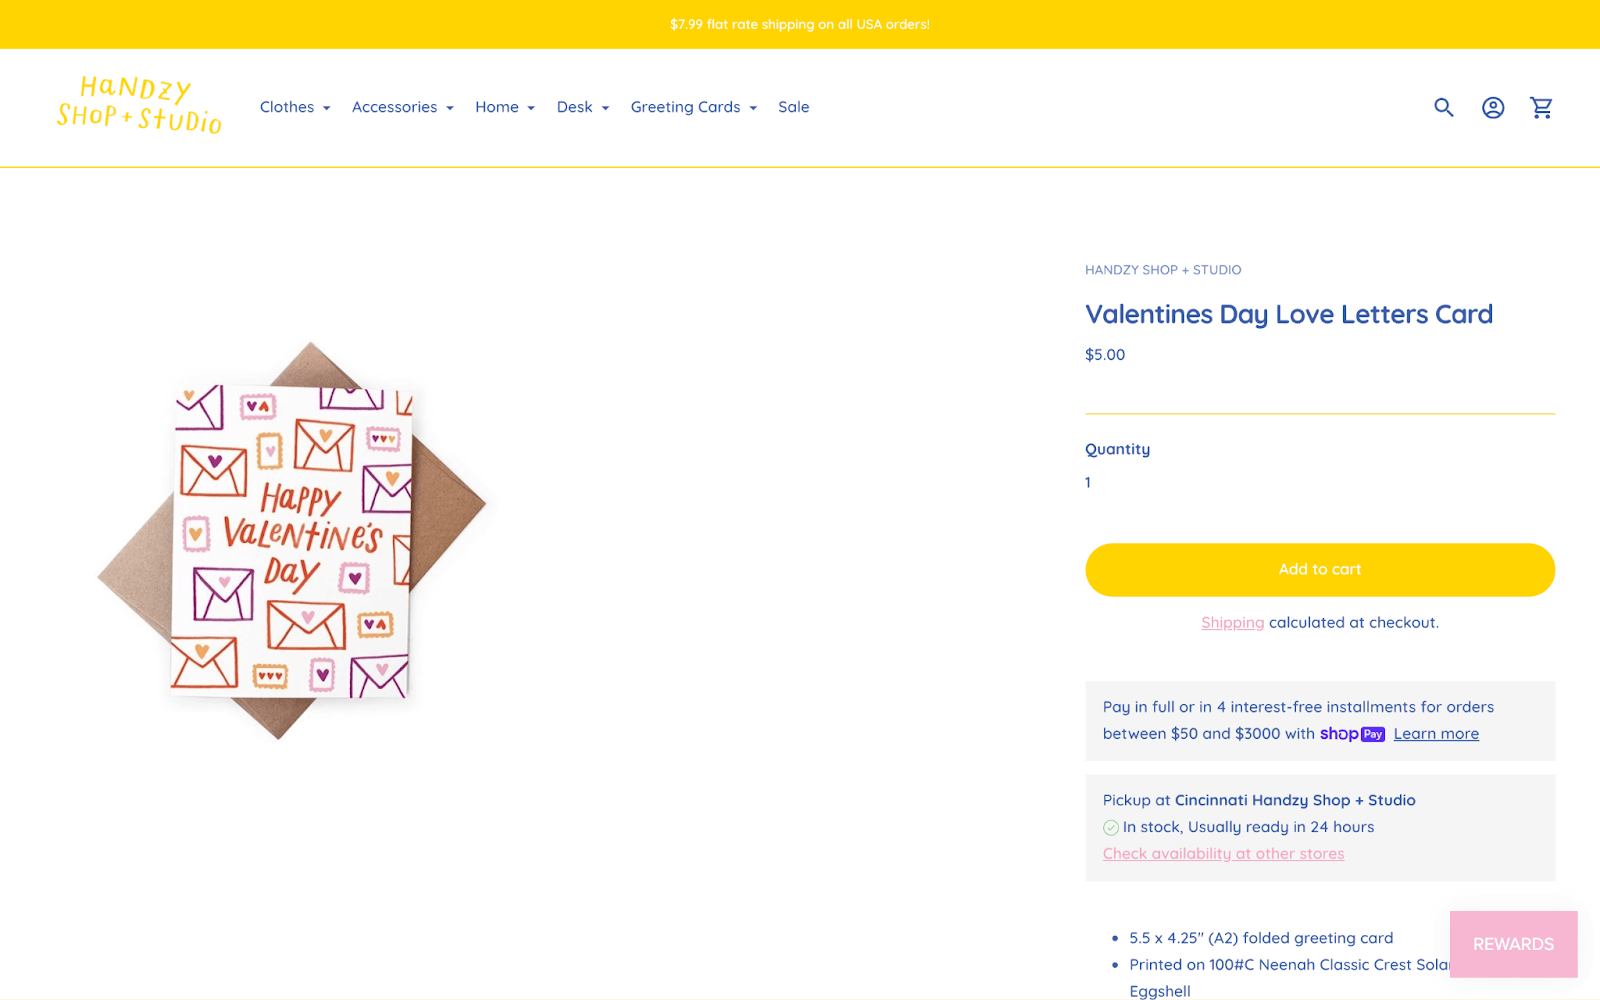 Valentine’s Day Gift Guide–A screenshot from Handzy Shop + Studio’s Valentine’s Day Love Letter Card product page showing a white card with pink, orange, red, and purple envelope illustrations on it. 